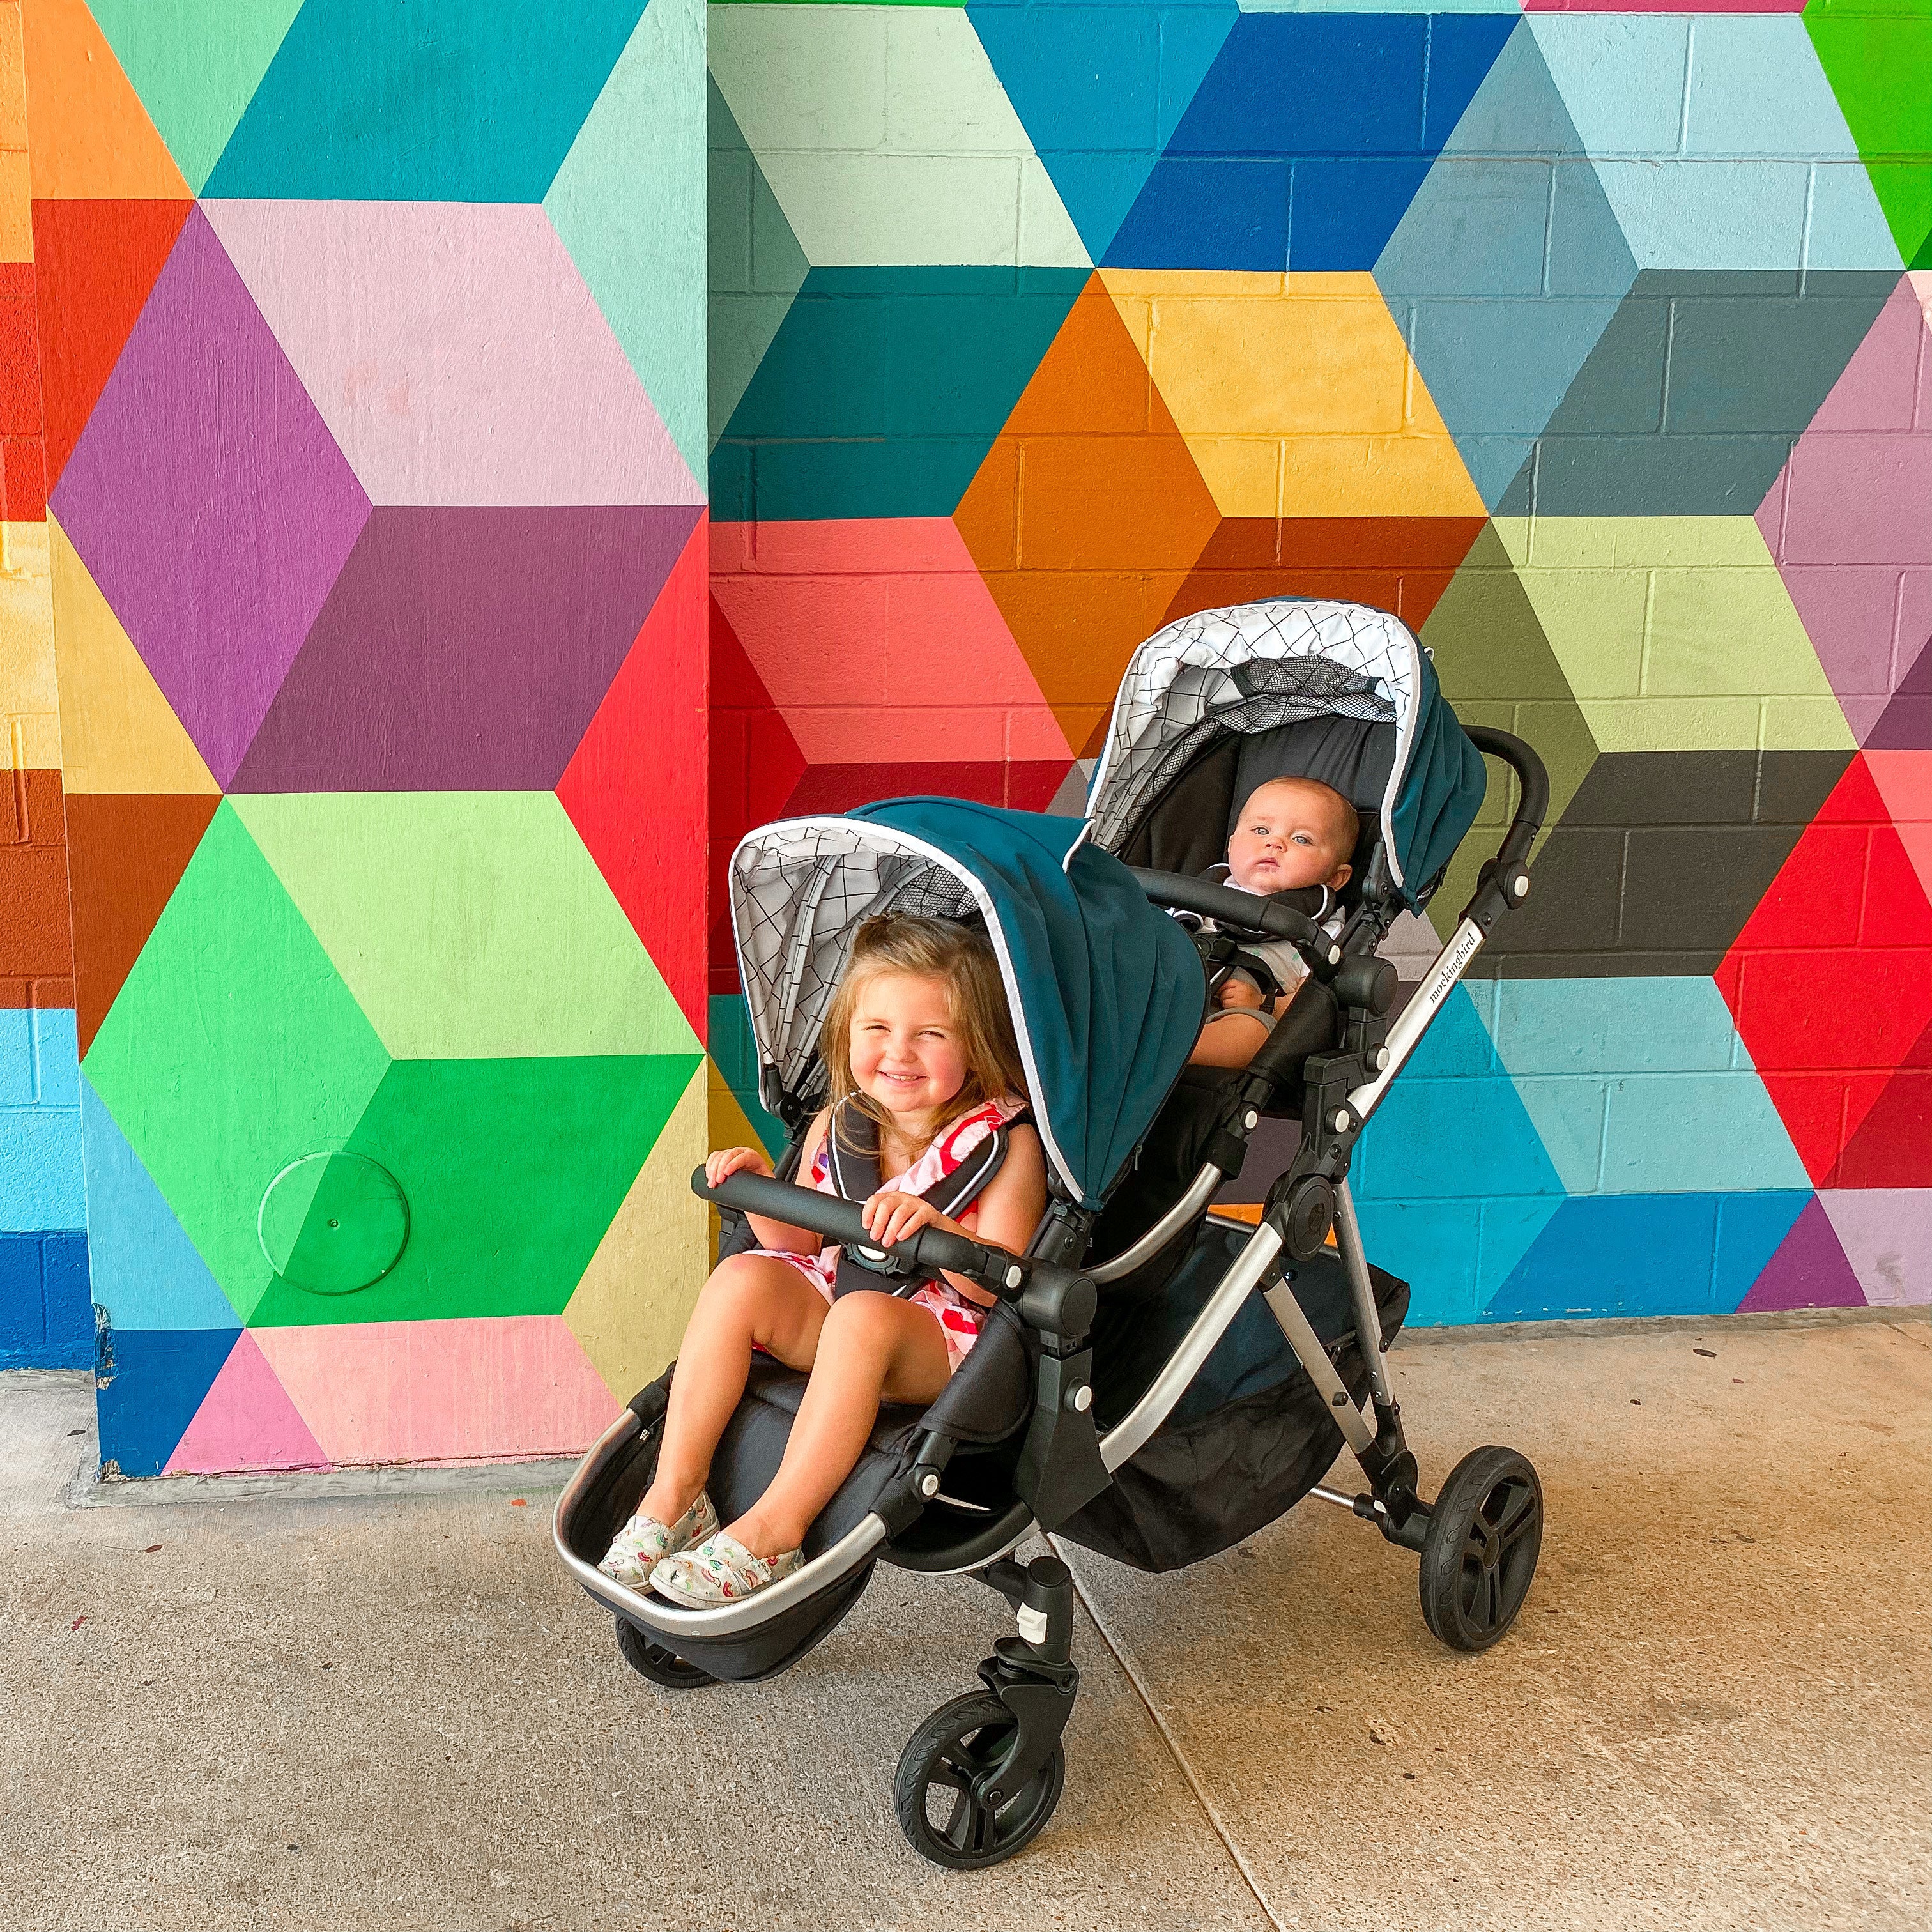 Two children in a double stroller in front of a colorful geometric mural. one child smiles while the other appears to be asleep.